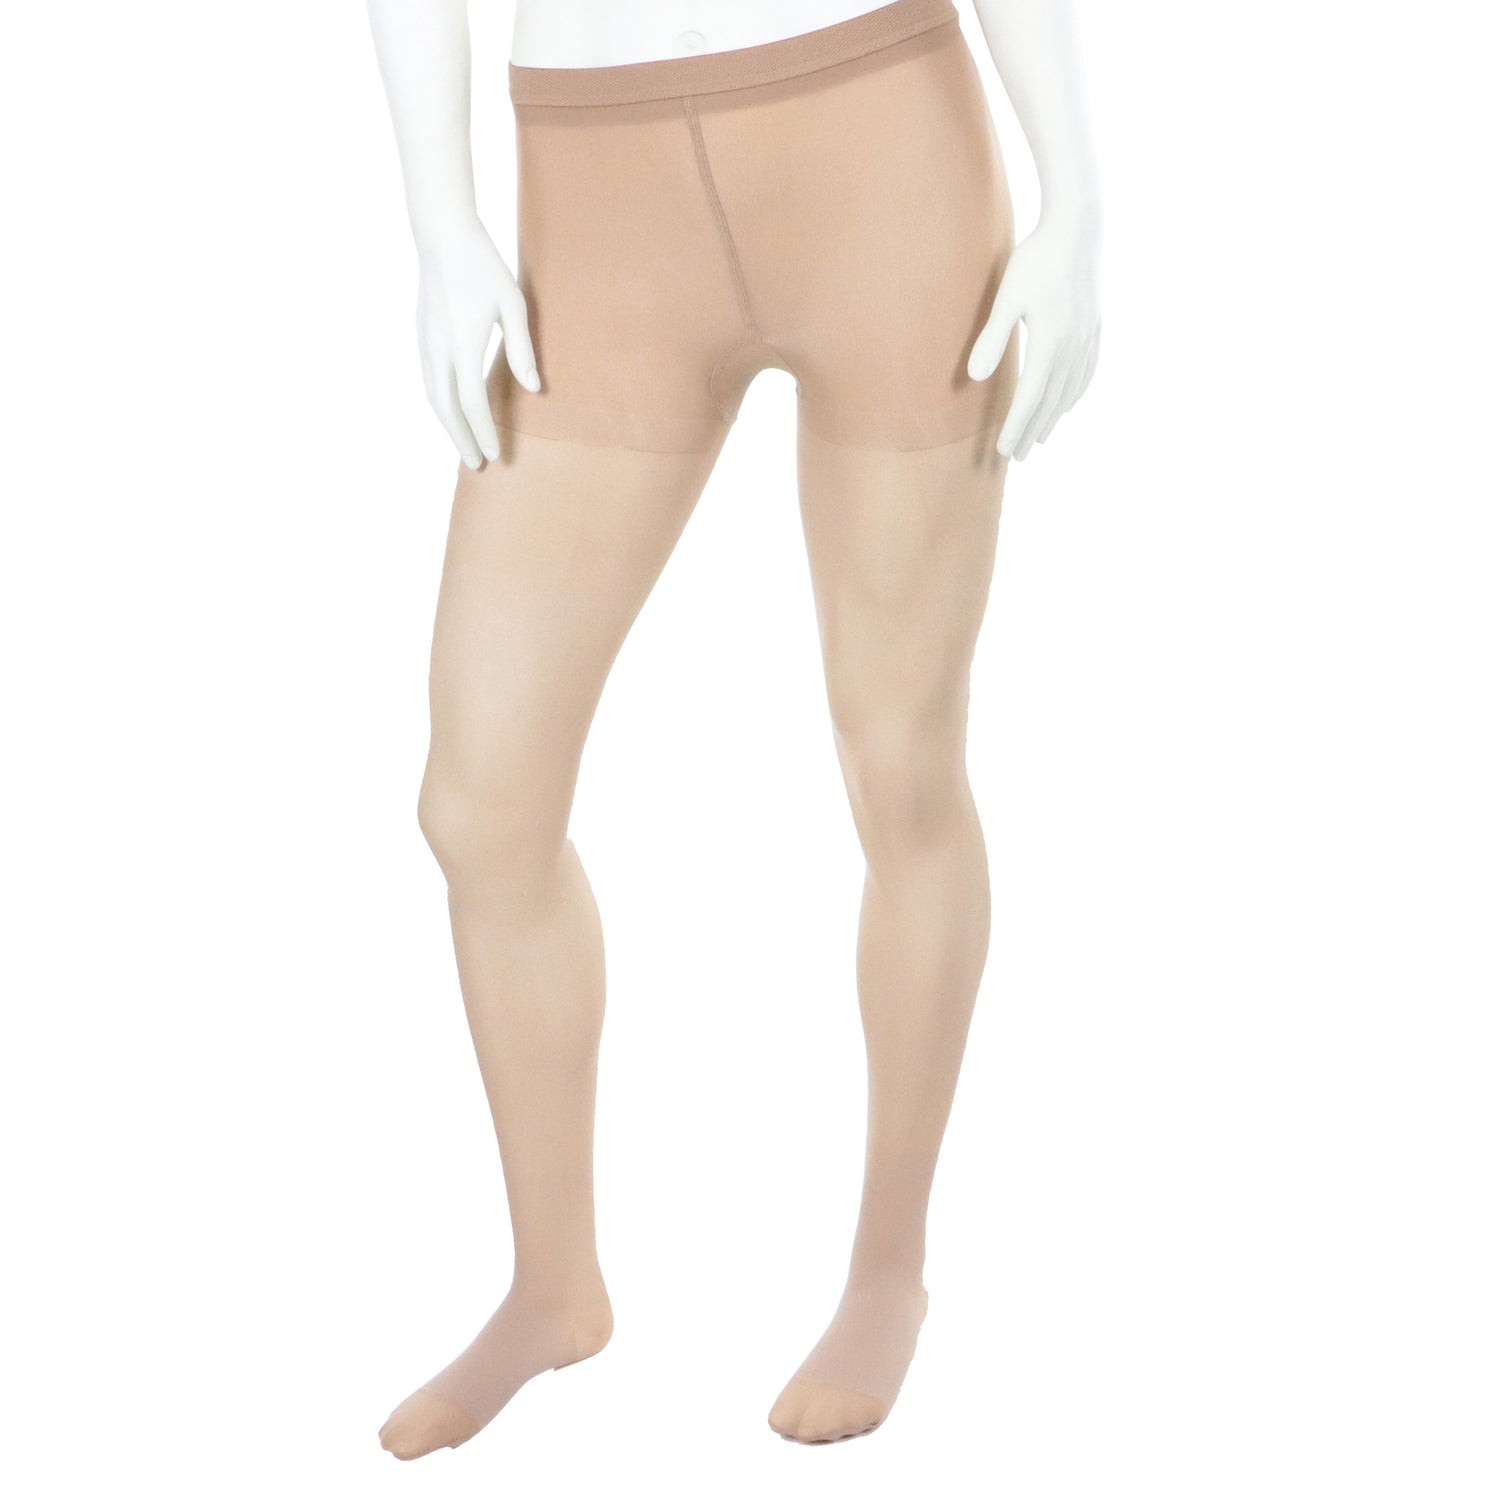 Tights compression stockings graduated 20-30 compression in beige Doctor Brace Circutrend